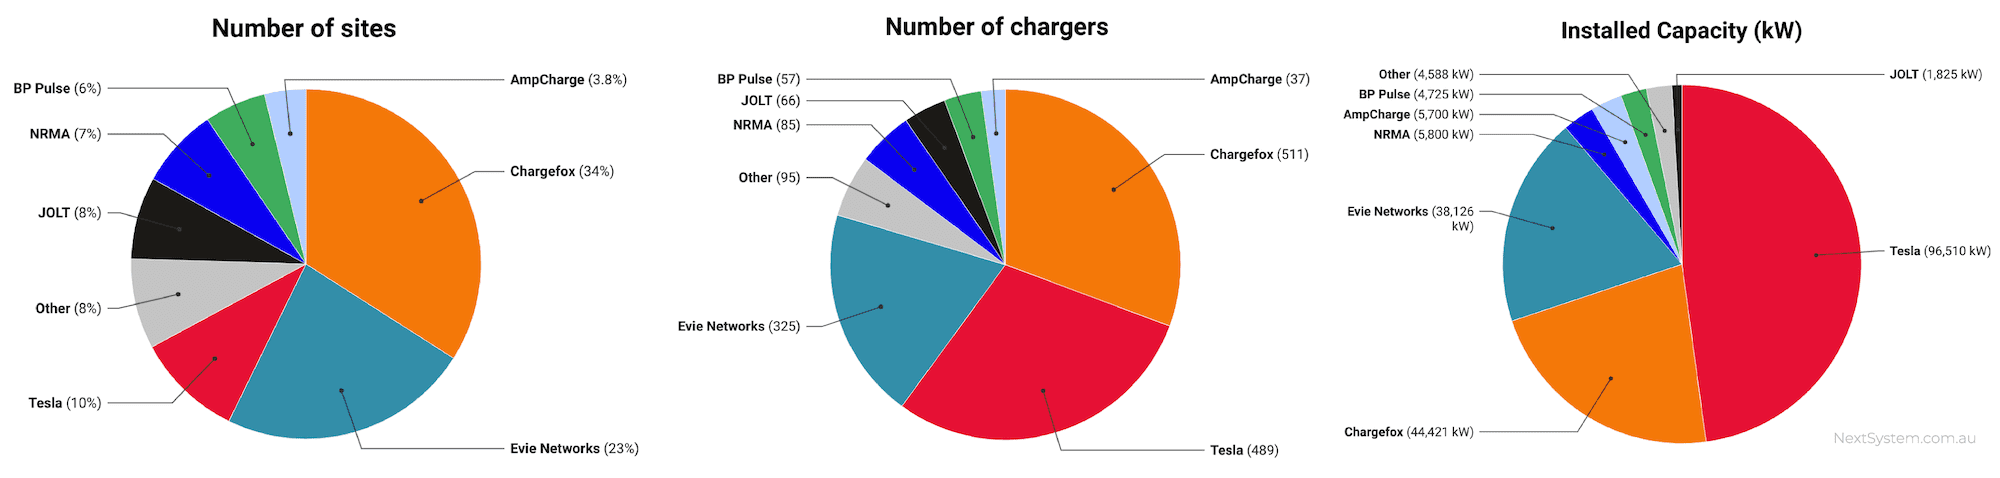 Australian EV fast charger network market share by number of sites, chargers and installed capacity.